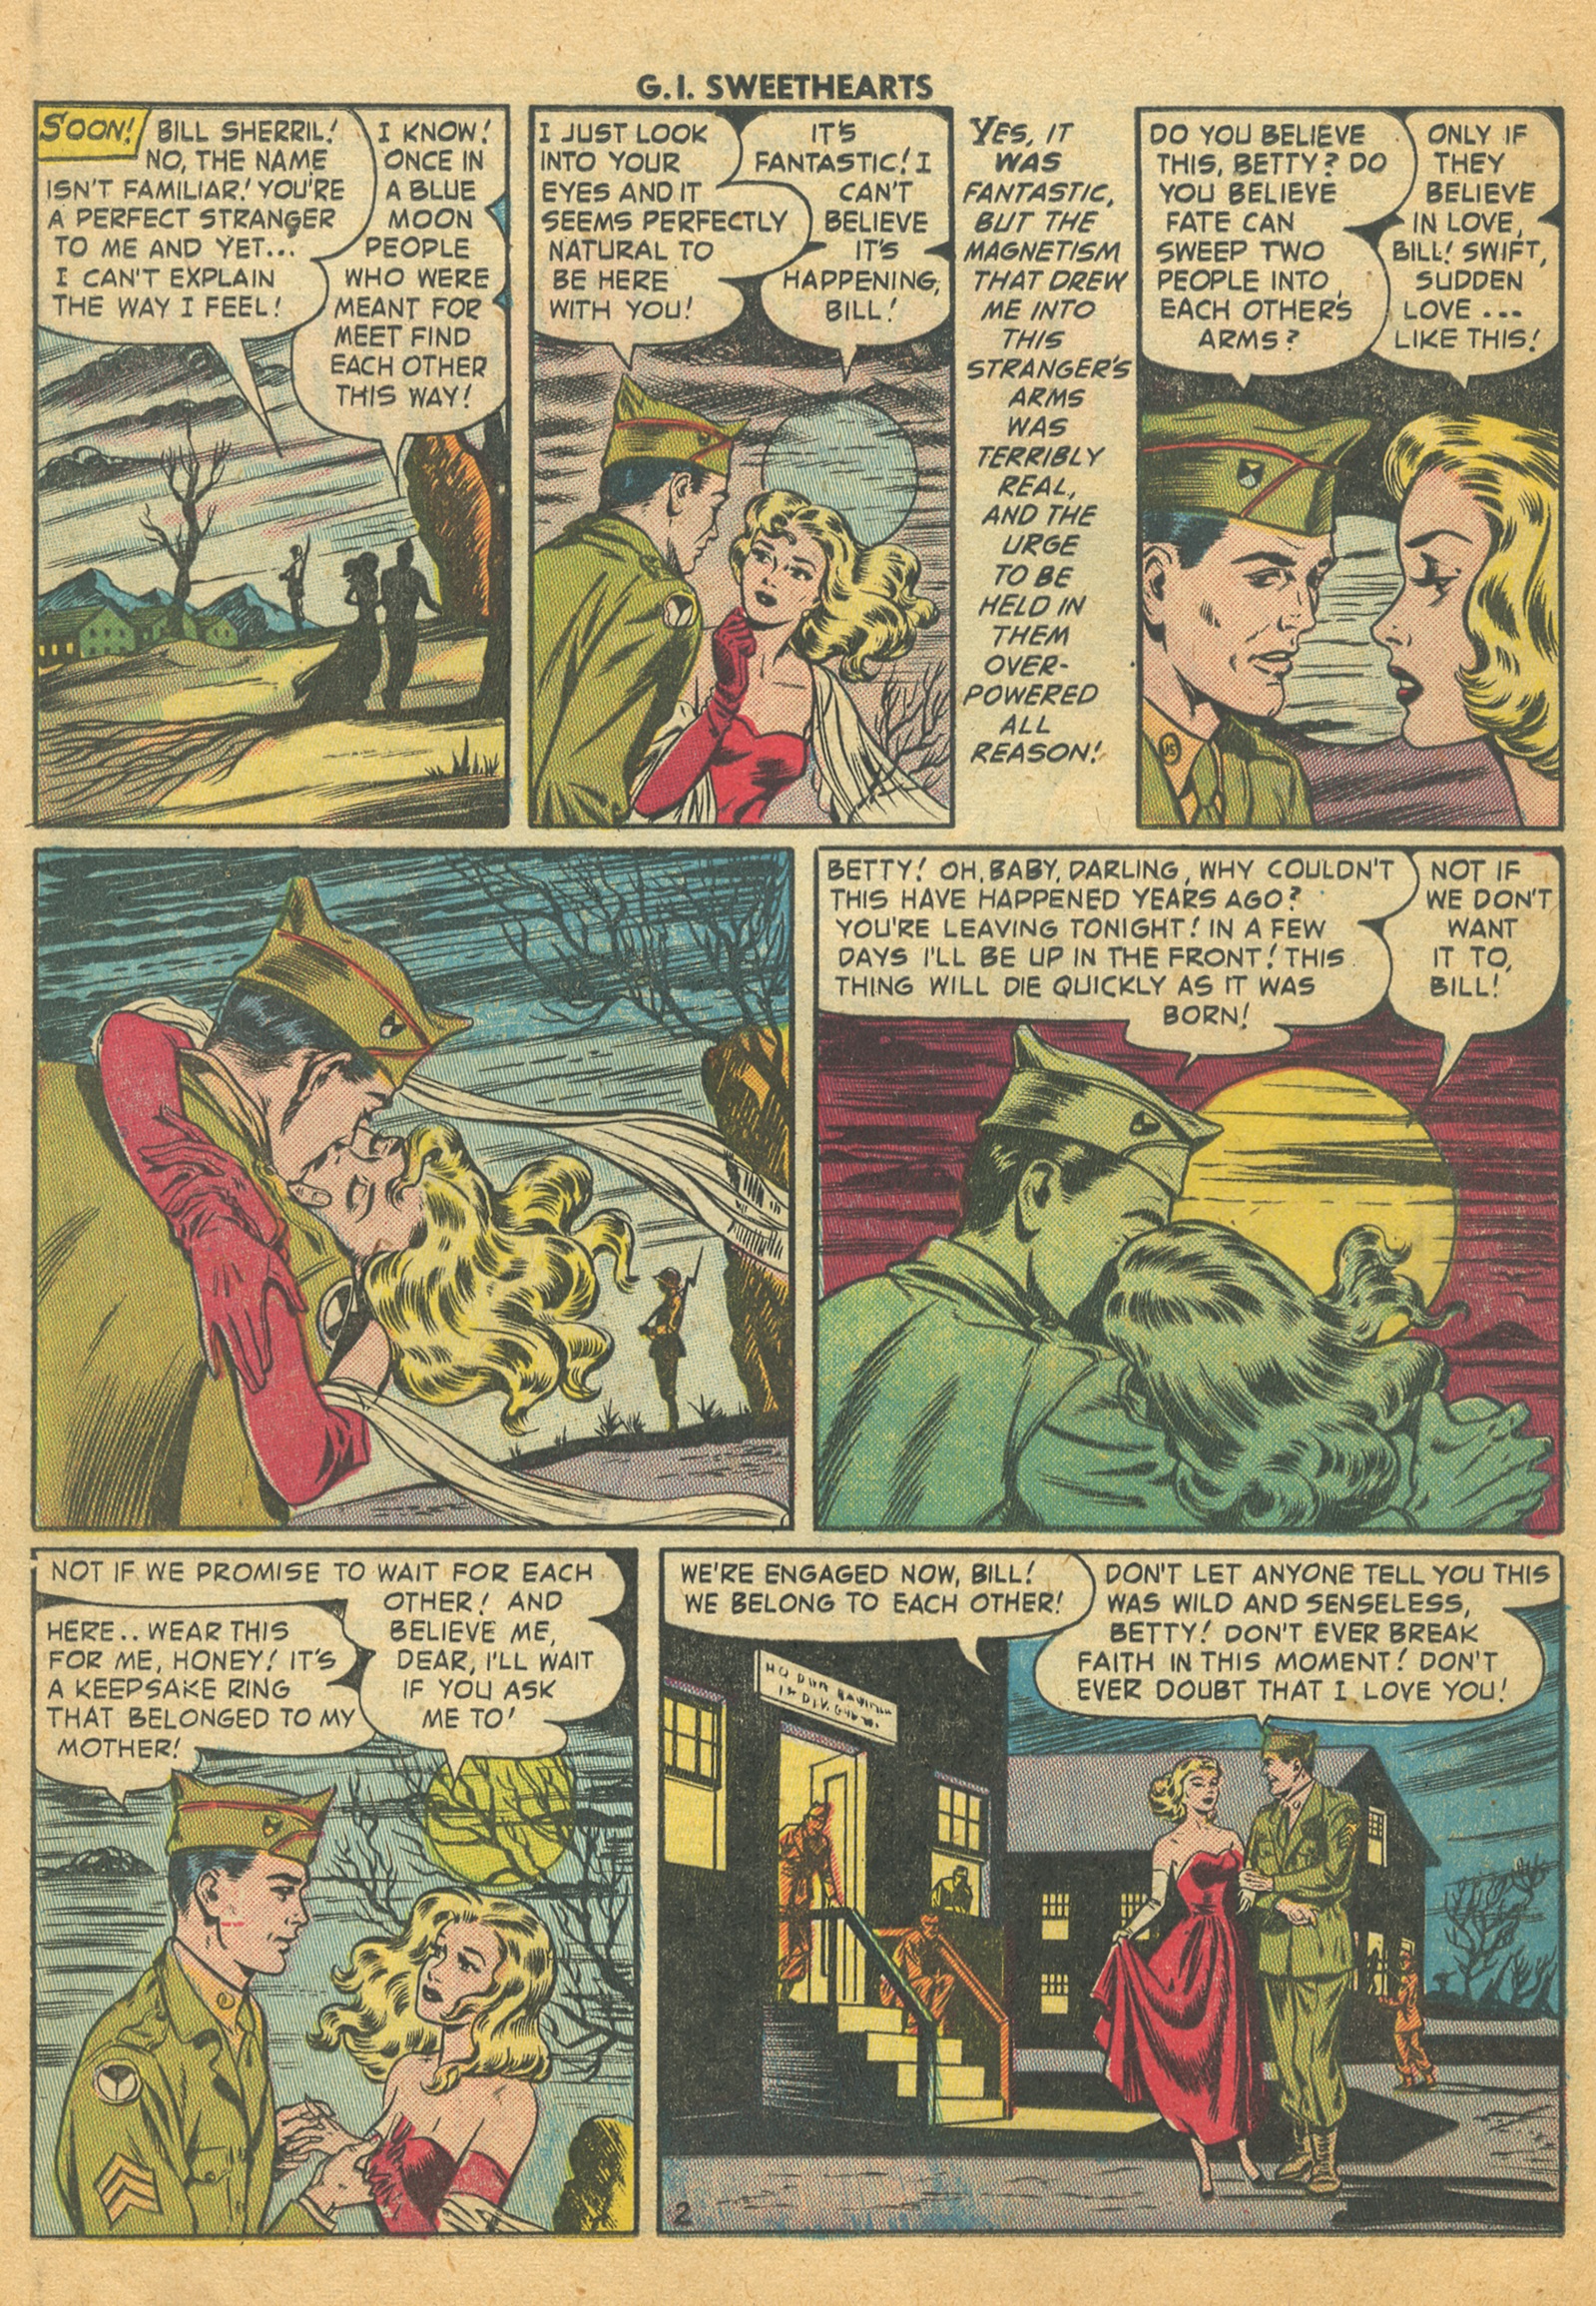 Read online G.I. Sweethearts comic -  Issue #45 - 12